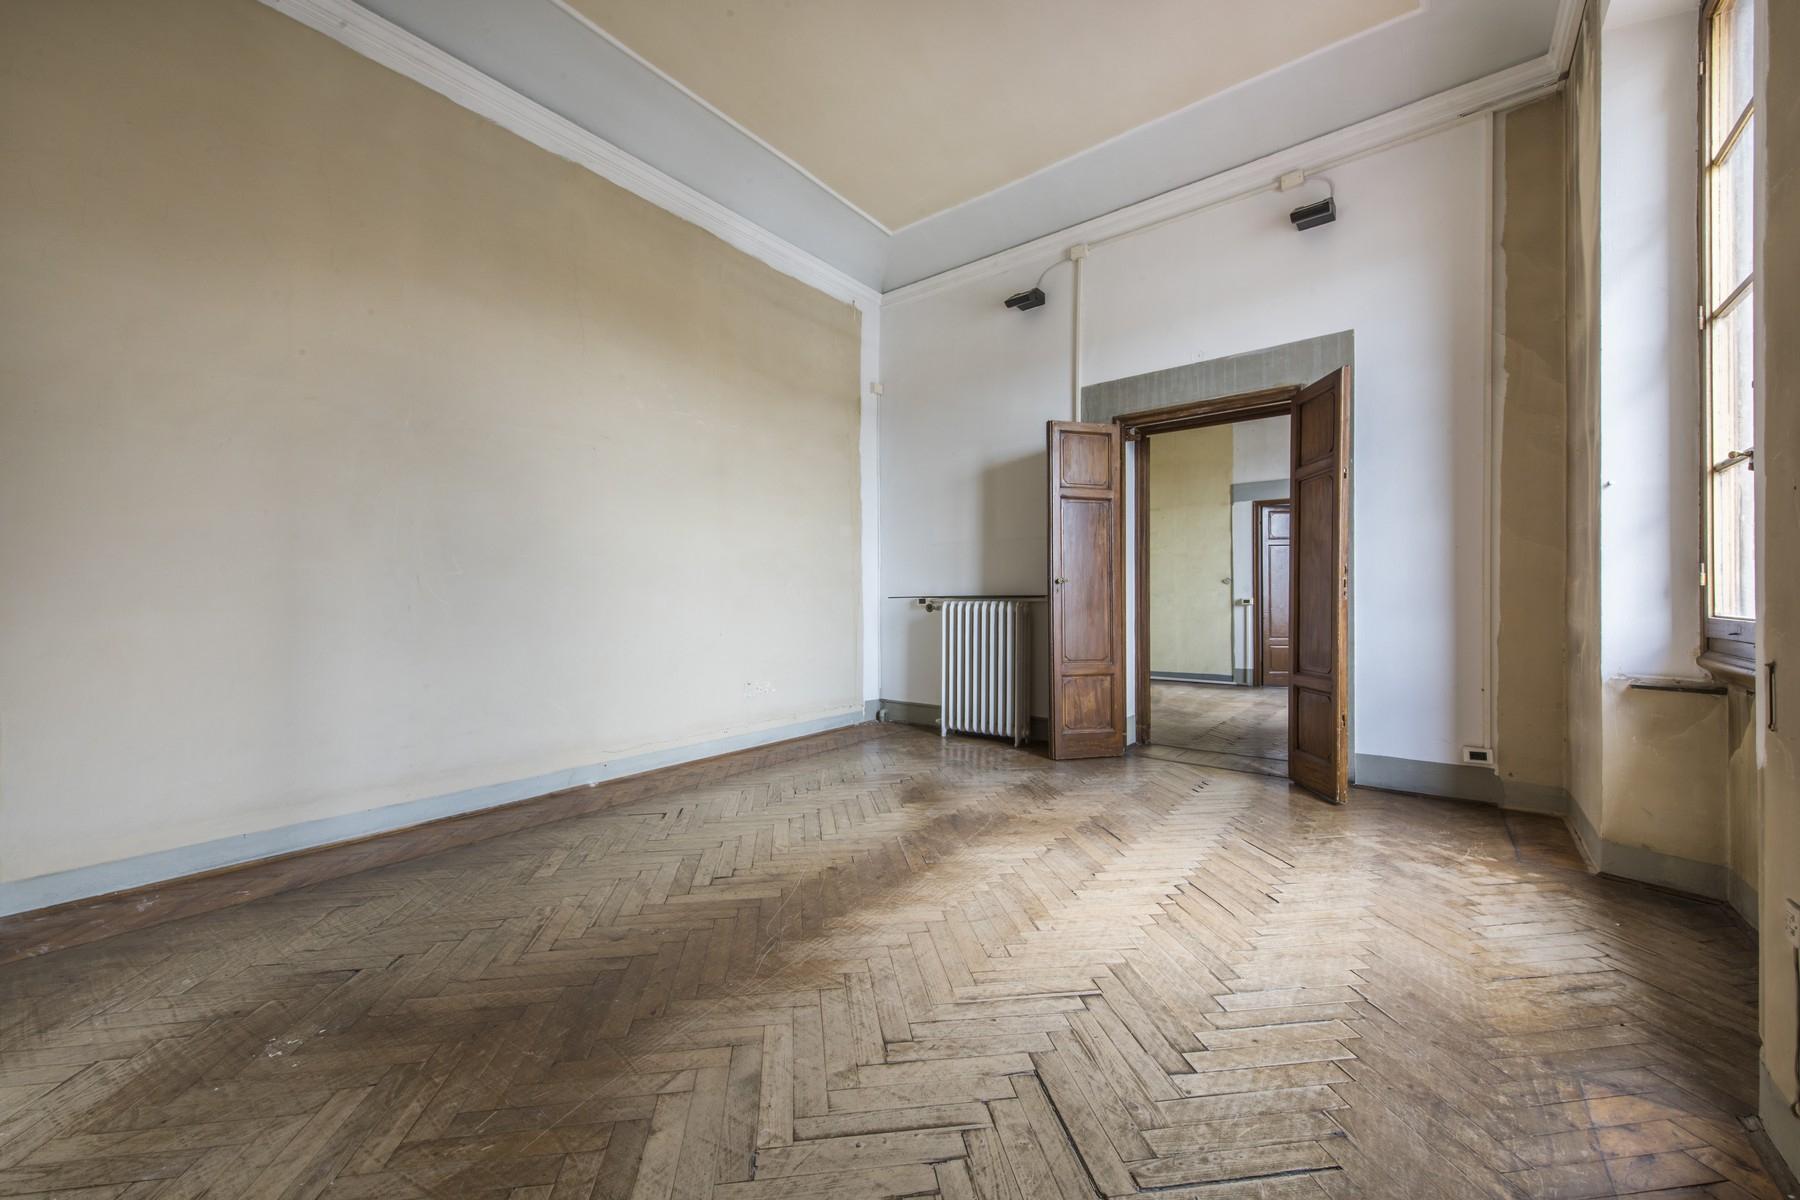 Magnificent 520sqm penthouse in a historic Florentine palazzo. - 16